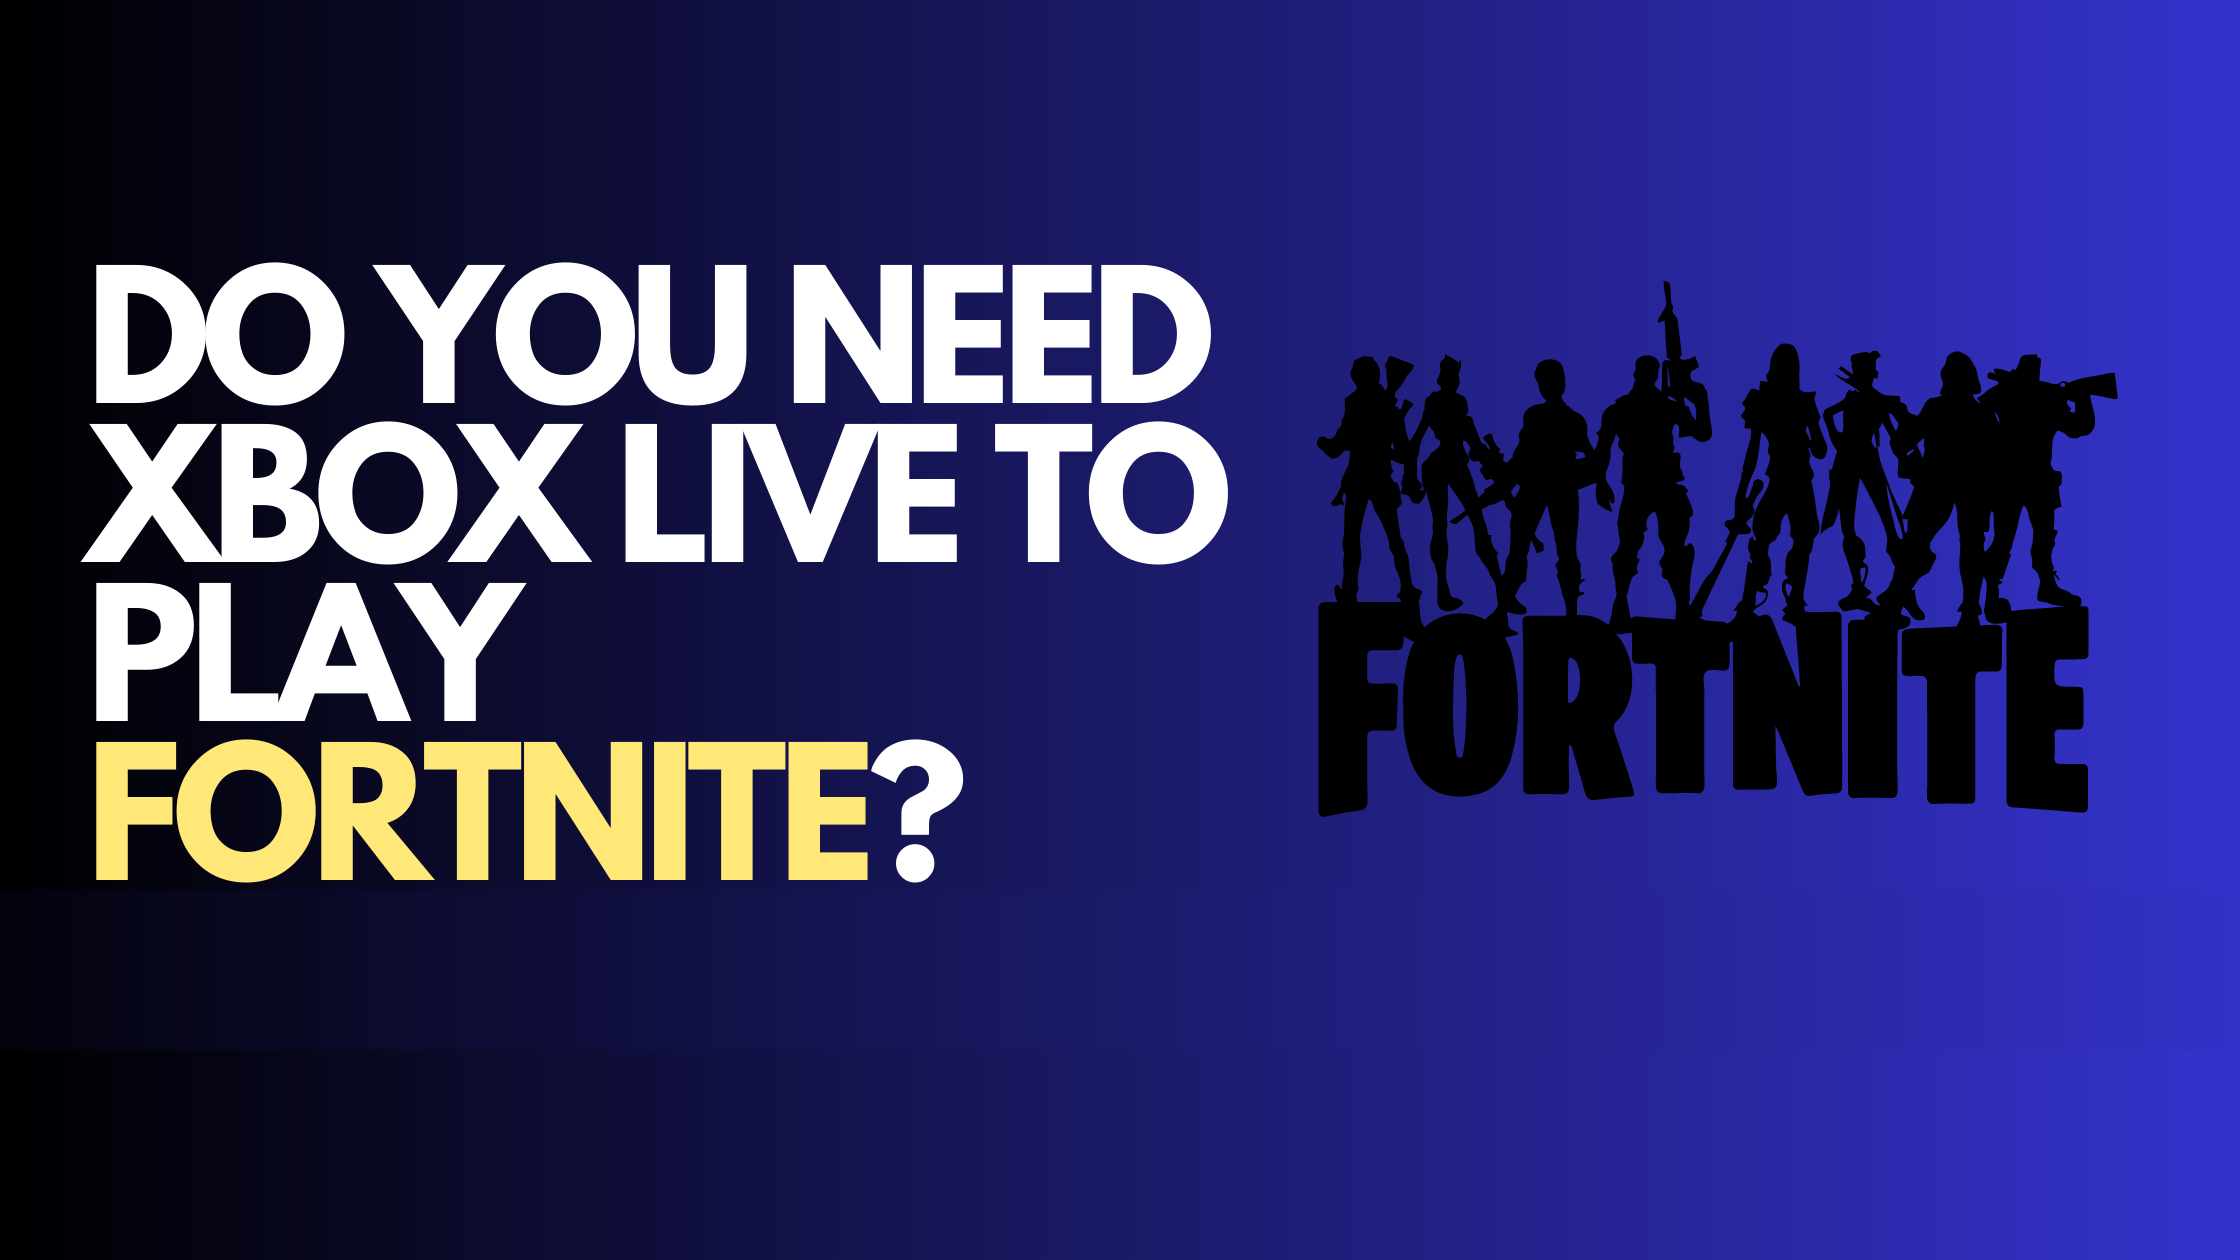 Do You Need Xbox Live To Play Fortnite